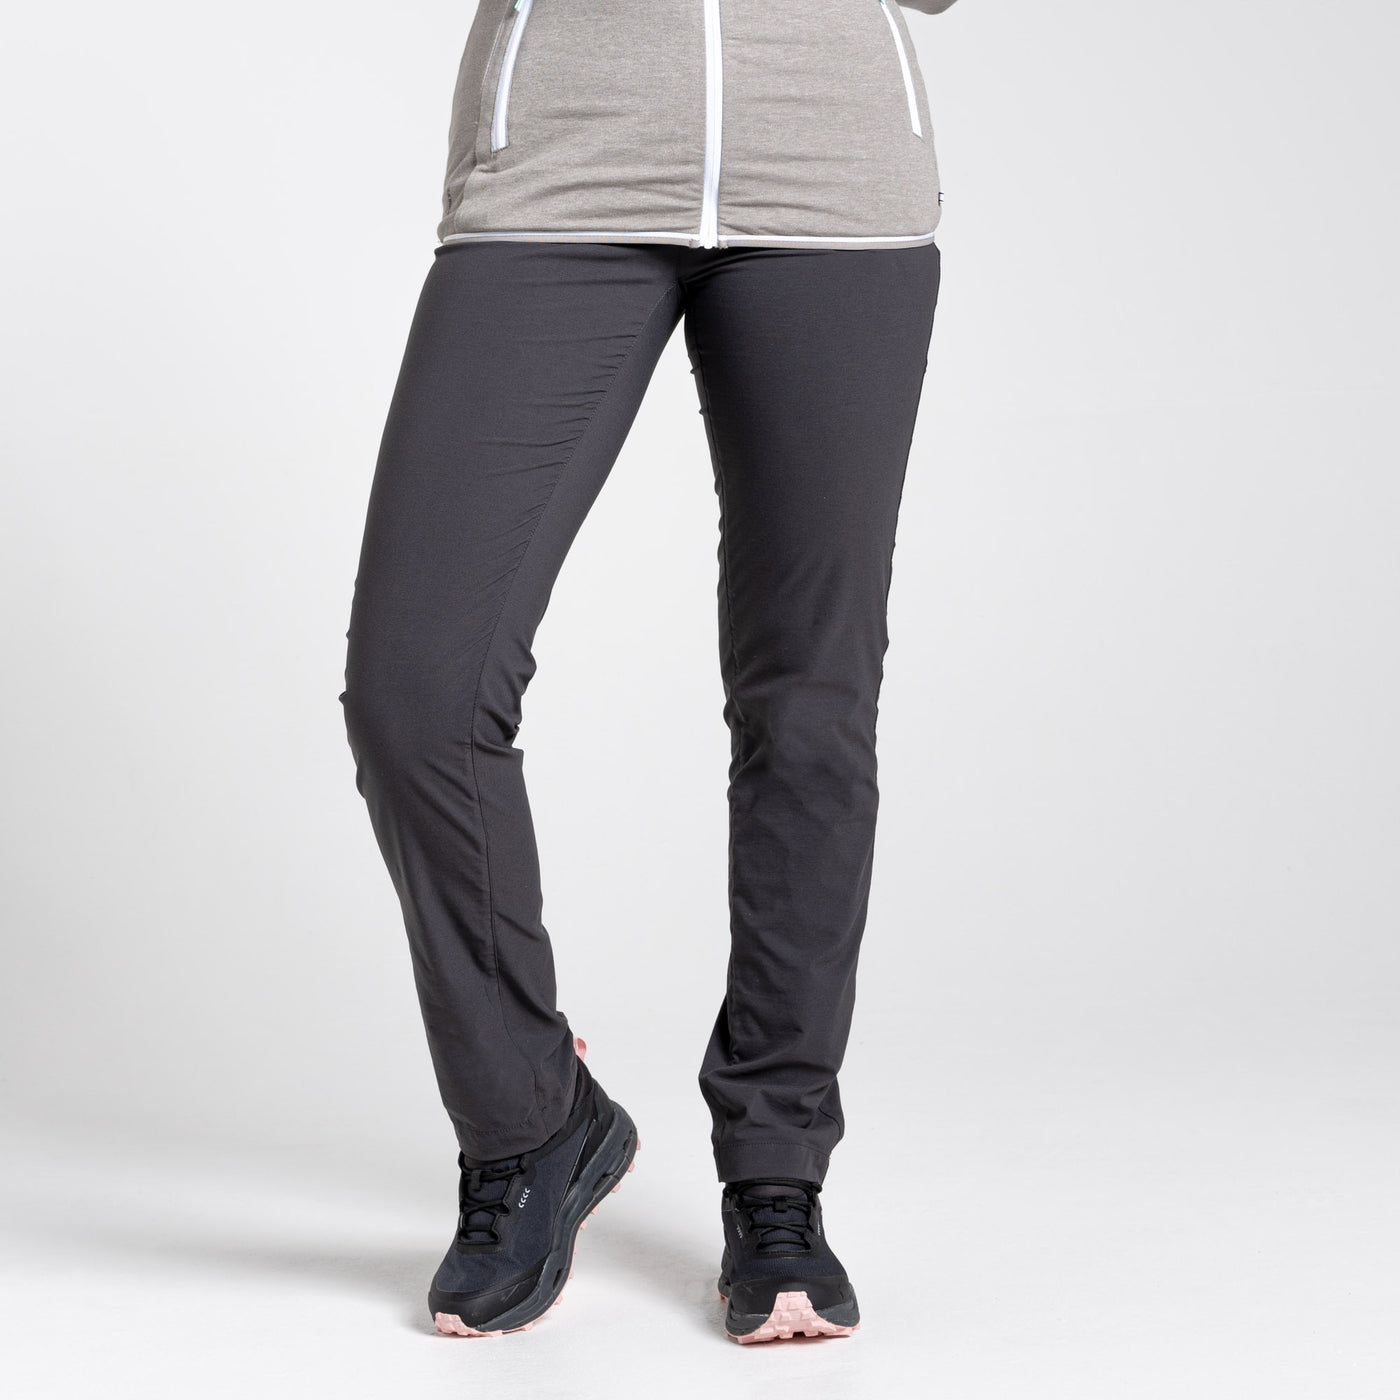 NL pro active trousers woman